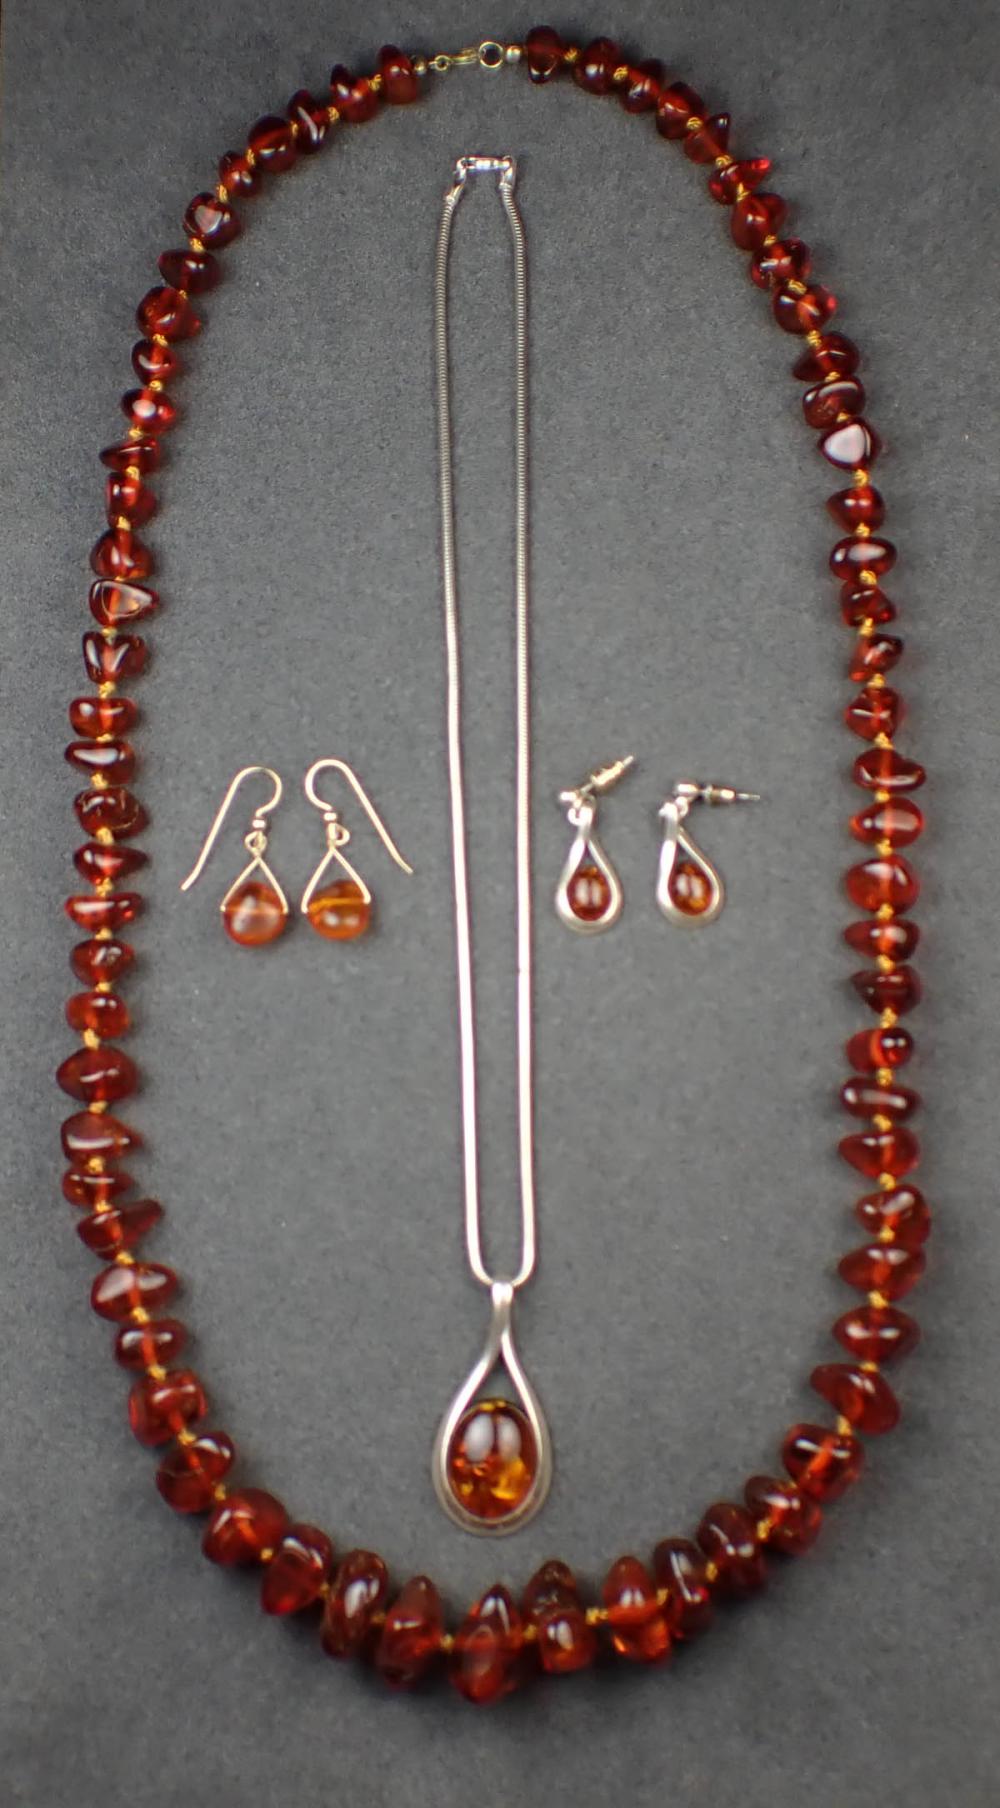 COLLECTION OF BALTIC AMBER JEWELRYCOLLECTION 2edc76